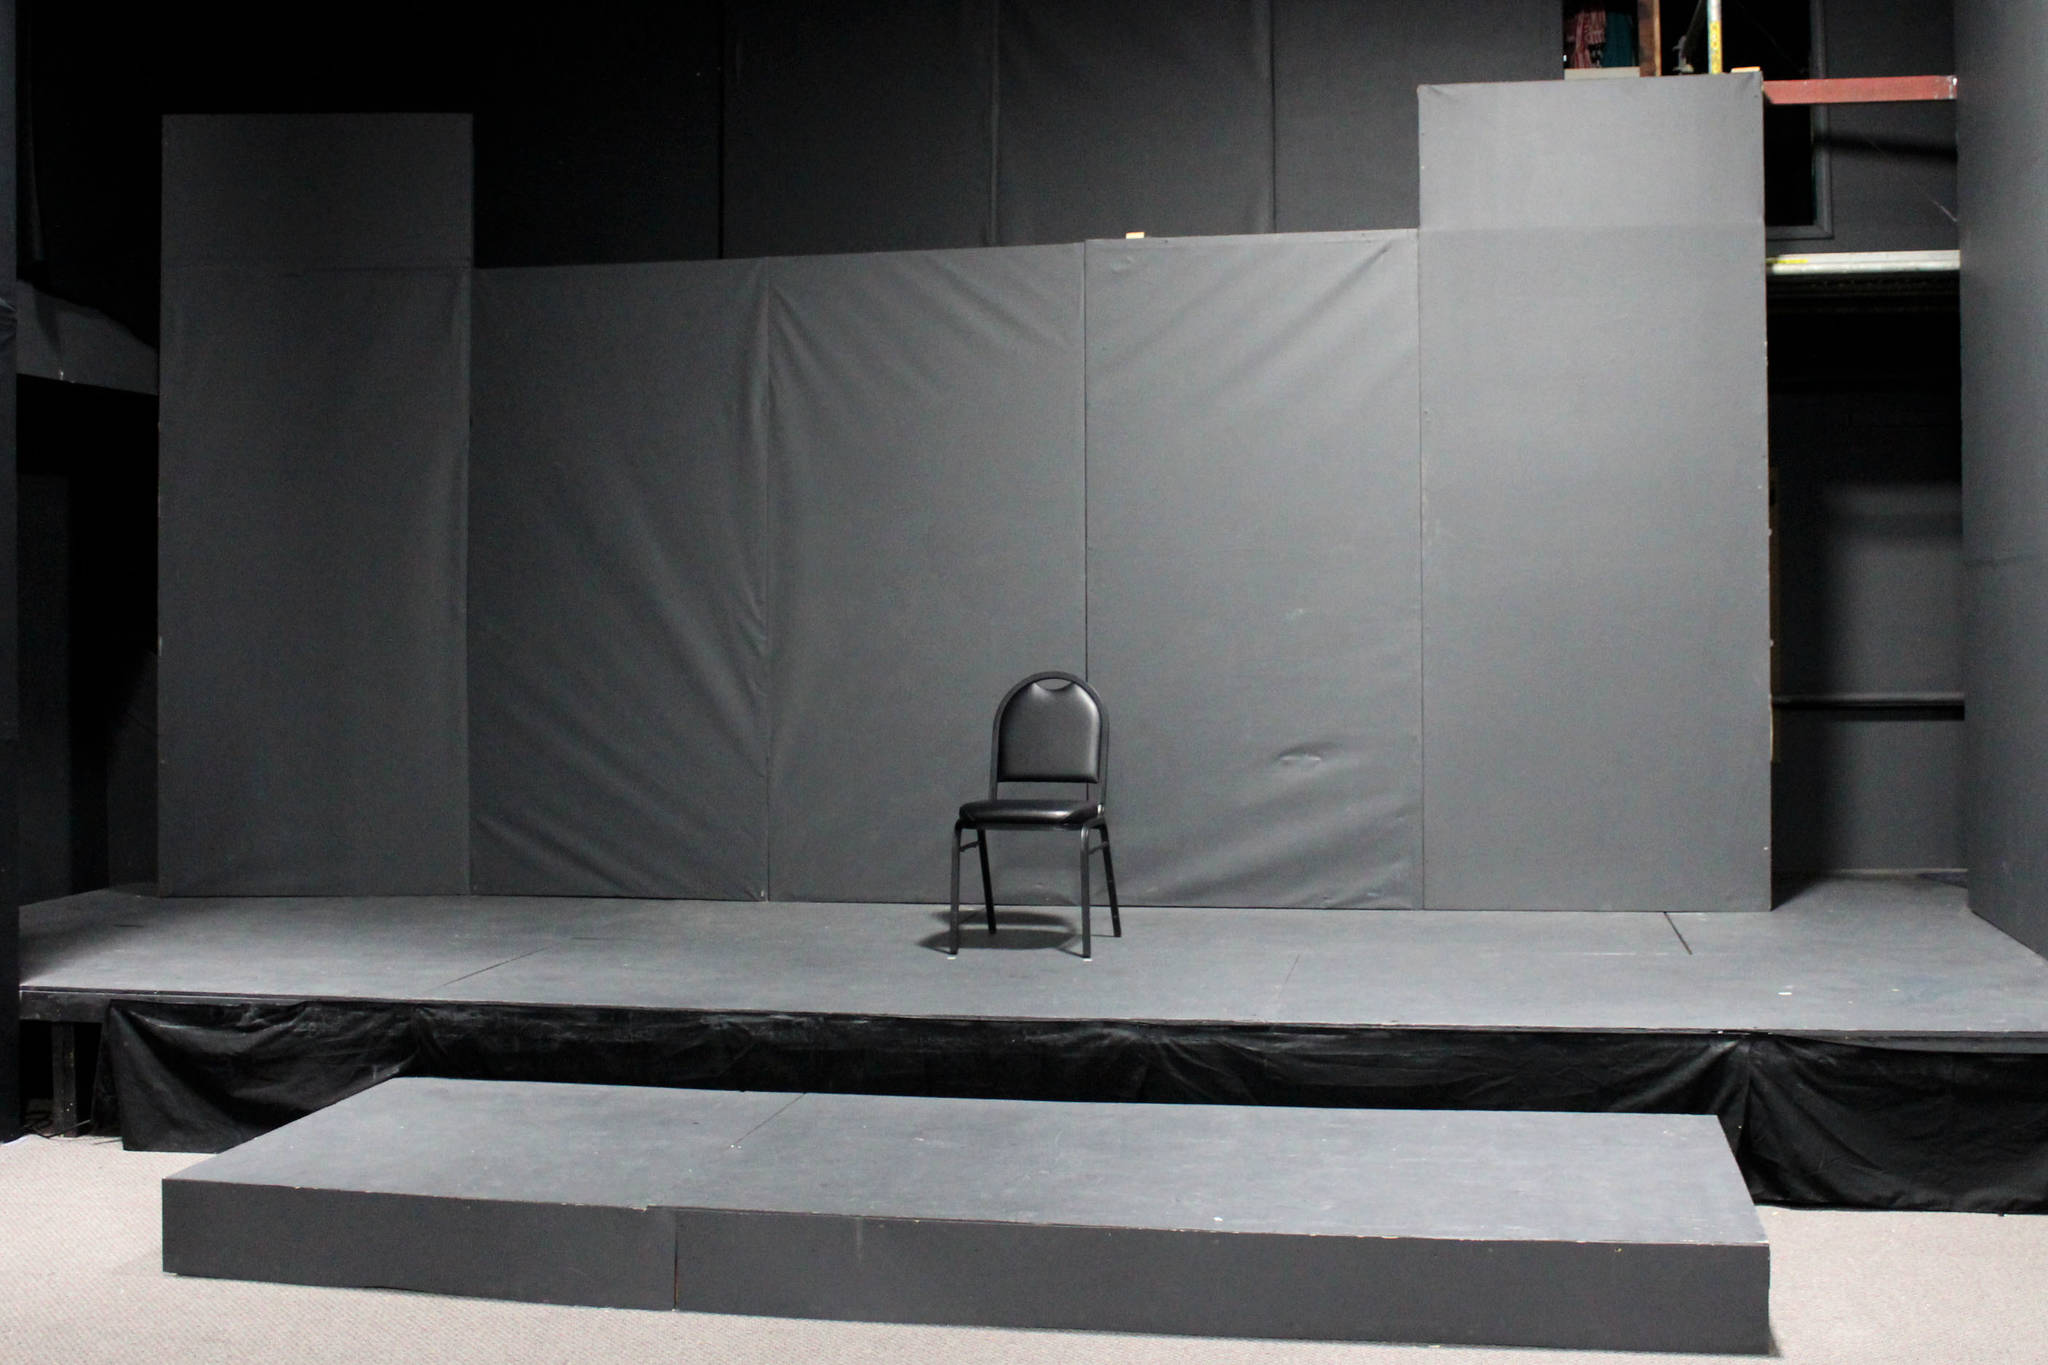 The stage for “Grounded” is seen inside of the Kenai Performers’ black box theatre on Monday, March 15, 2021, in Soldotna, Alaska. (Ashlyn O’Hara/Peninsula Clarion)